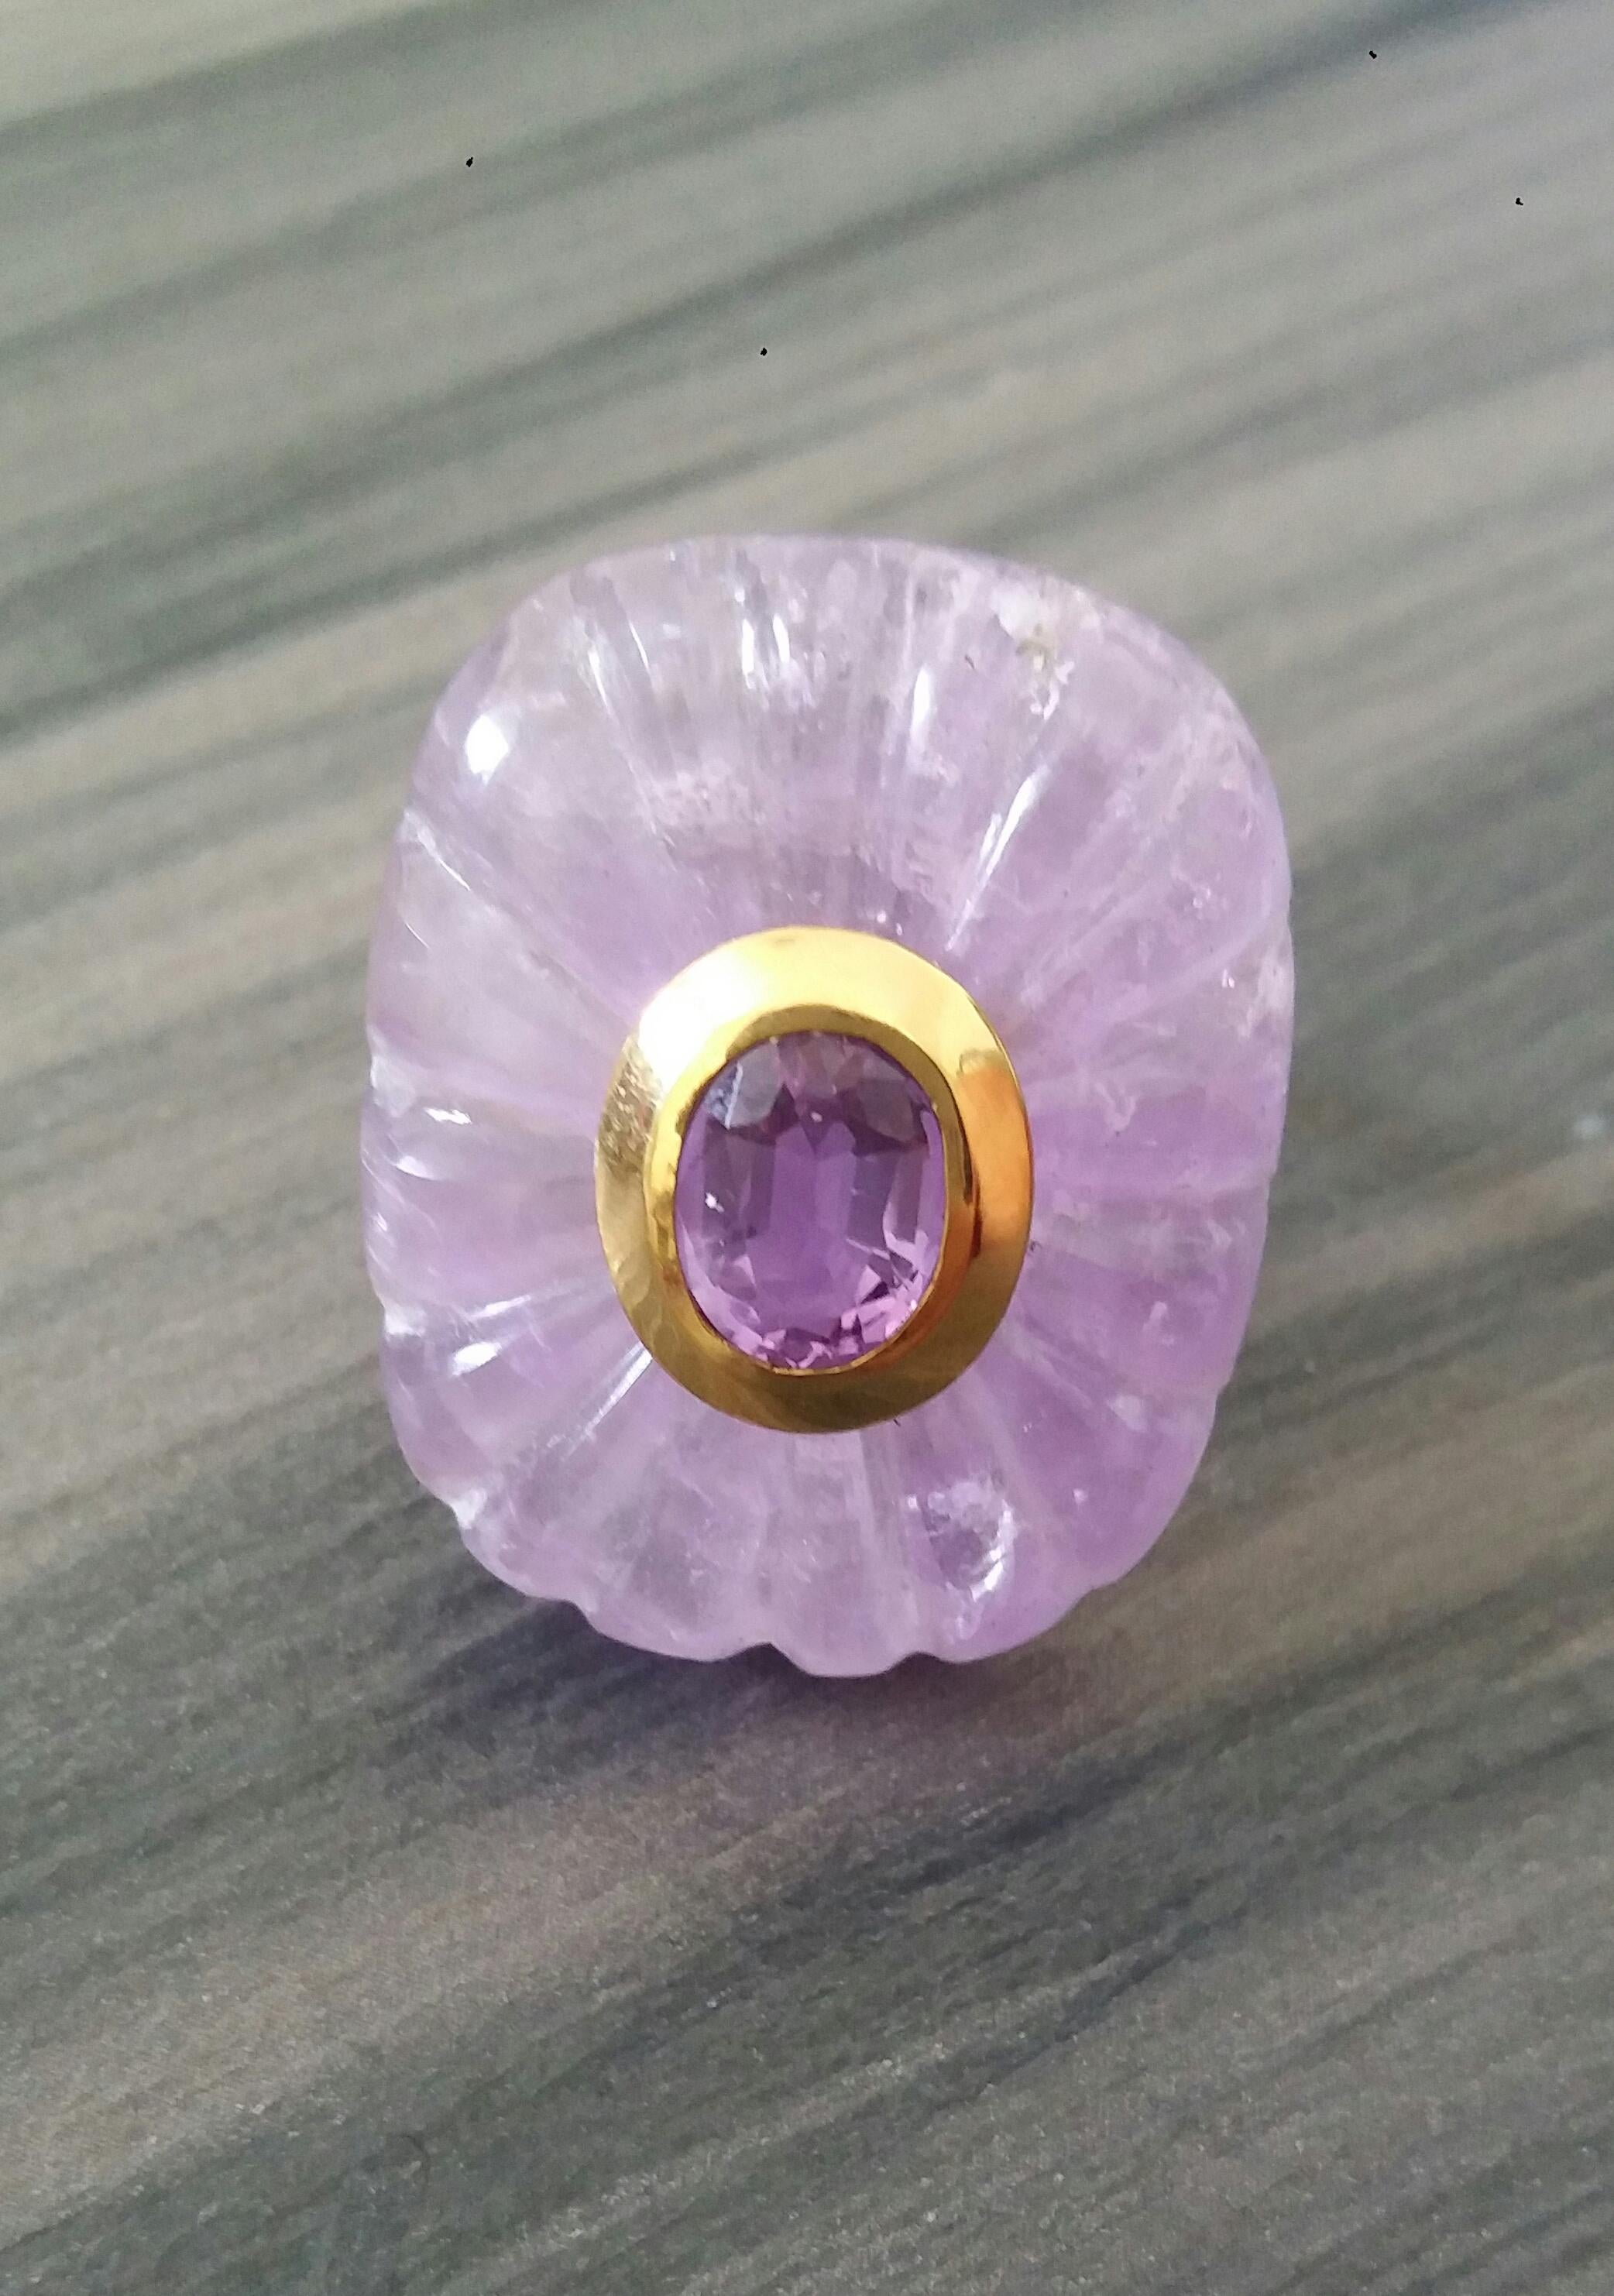 Unique ring with a Big Natural Engraved Cushion Shape Amethyst ,measuring 32 mm. x 24 mm x 8mm. and weighing 63 Carats with a nice Oval Faceted Amethyst measuring 7 mm x 9 mm set in 14 kt yellow gold in the middle...Ring shank is also in 14 kt 